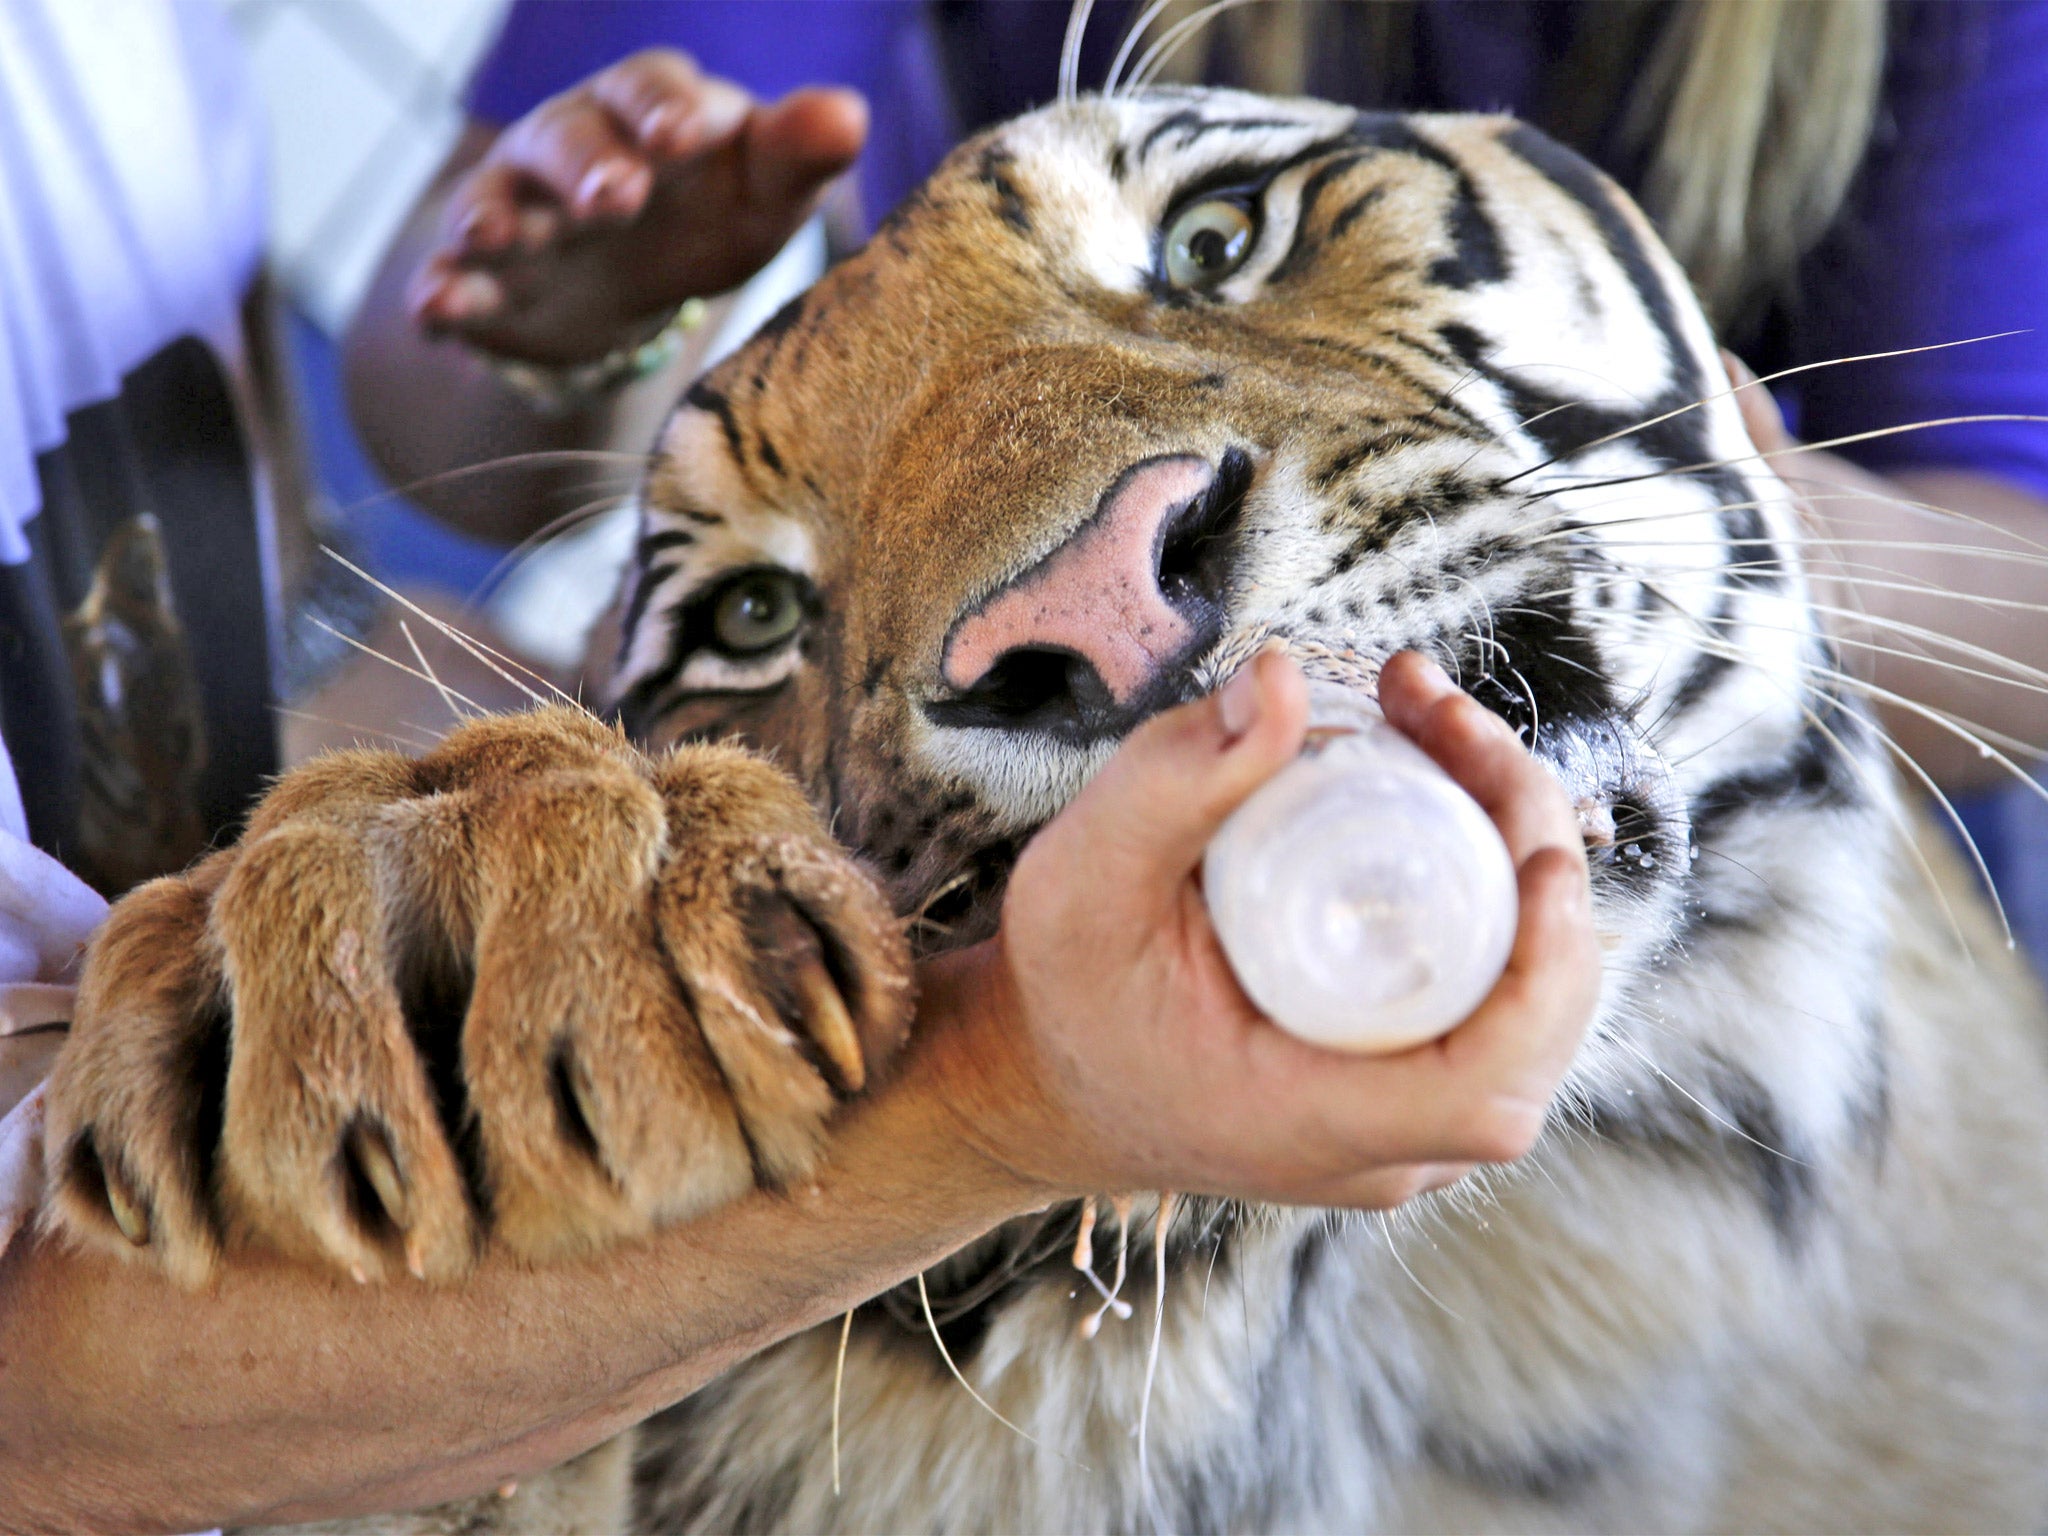 Dan, a two-year-old tiger, drinks from a nursing bottle